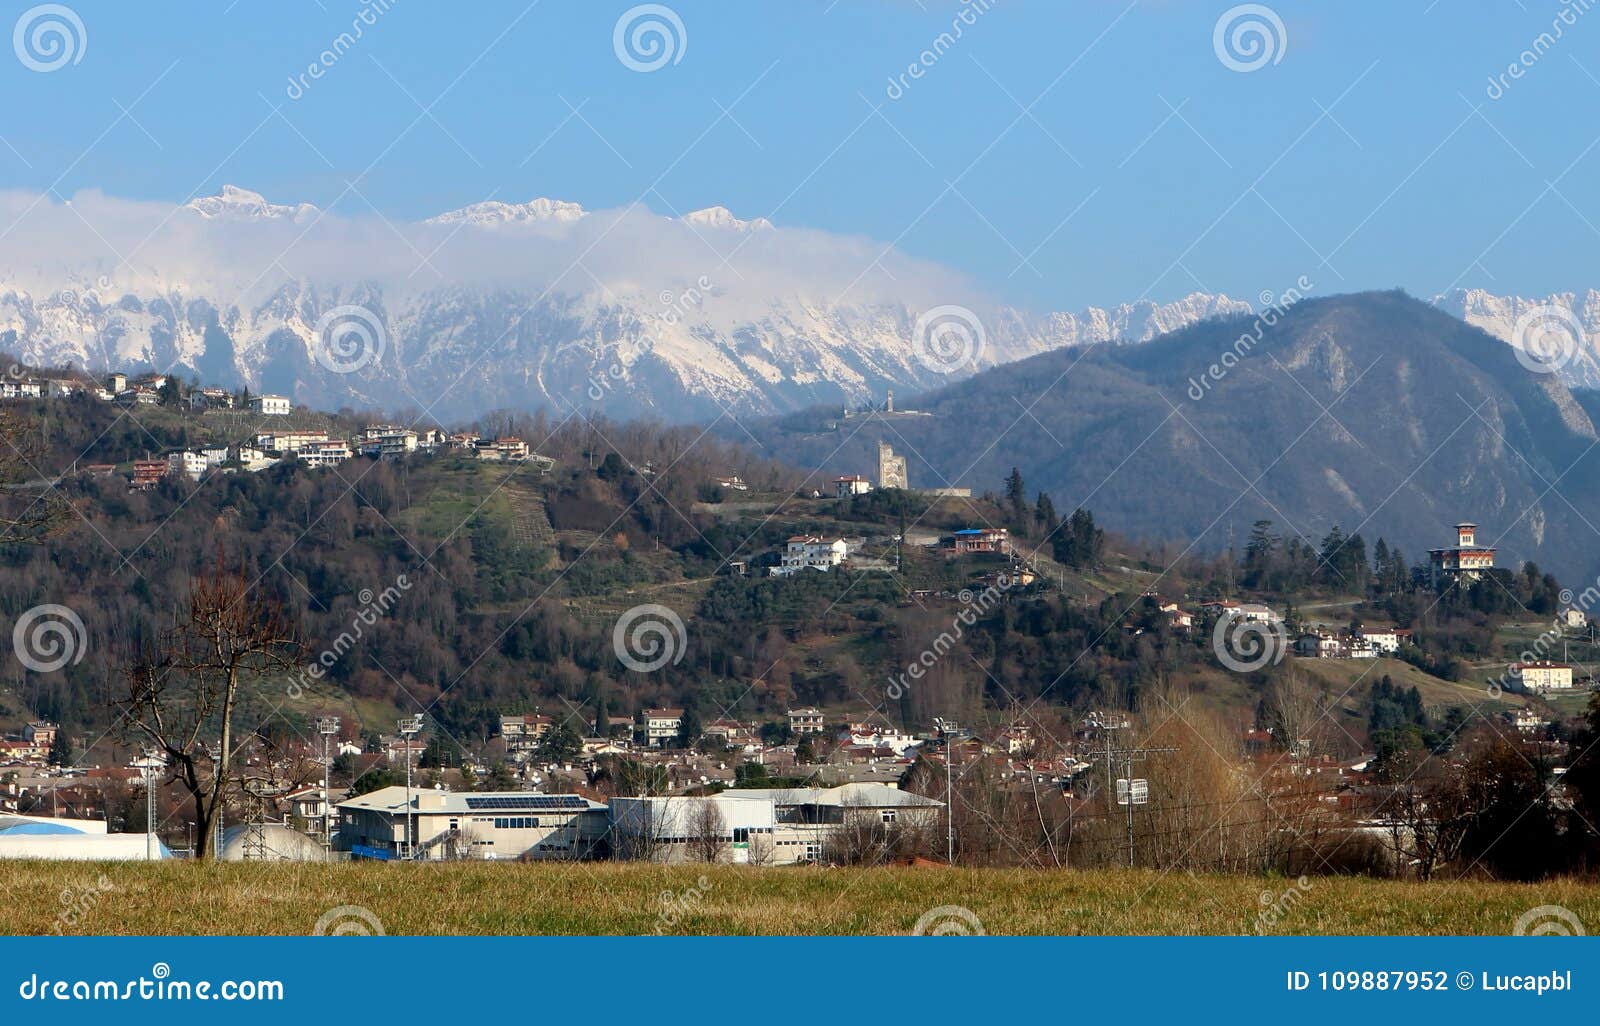 townscape of tarcento, near udine in italy, on its hills. on background the snowed julian alps